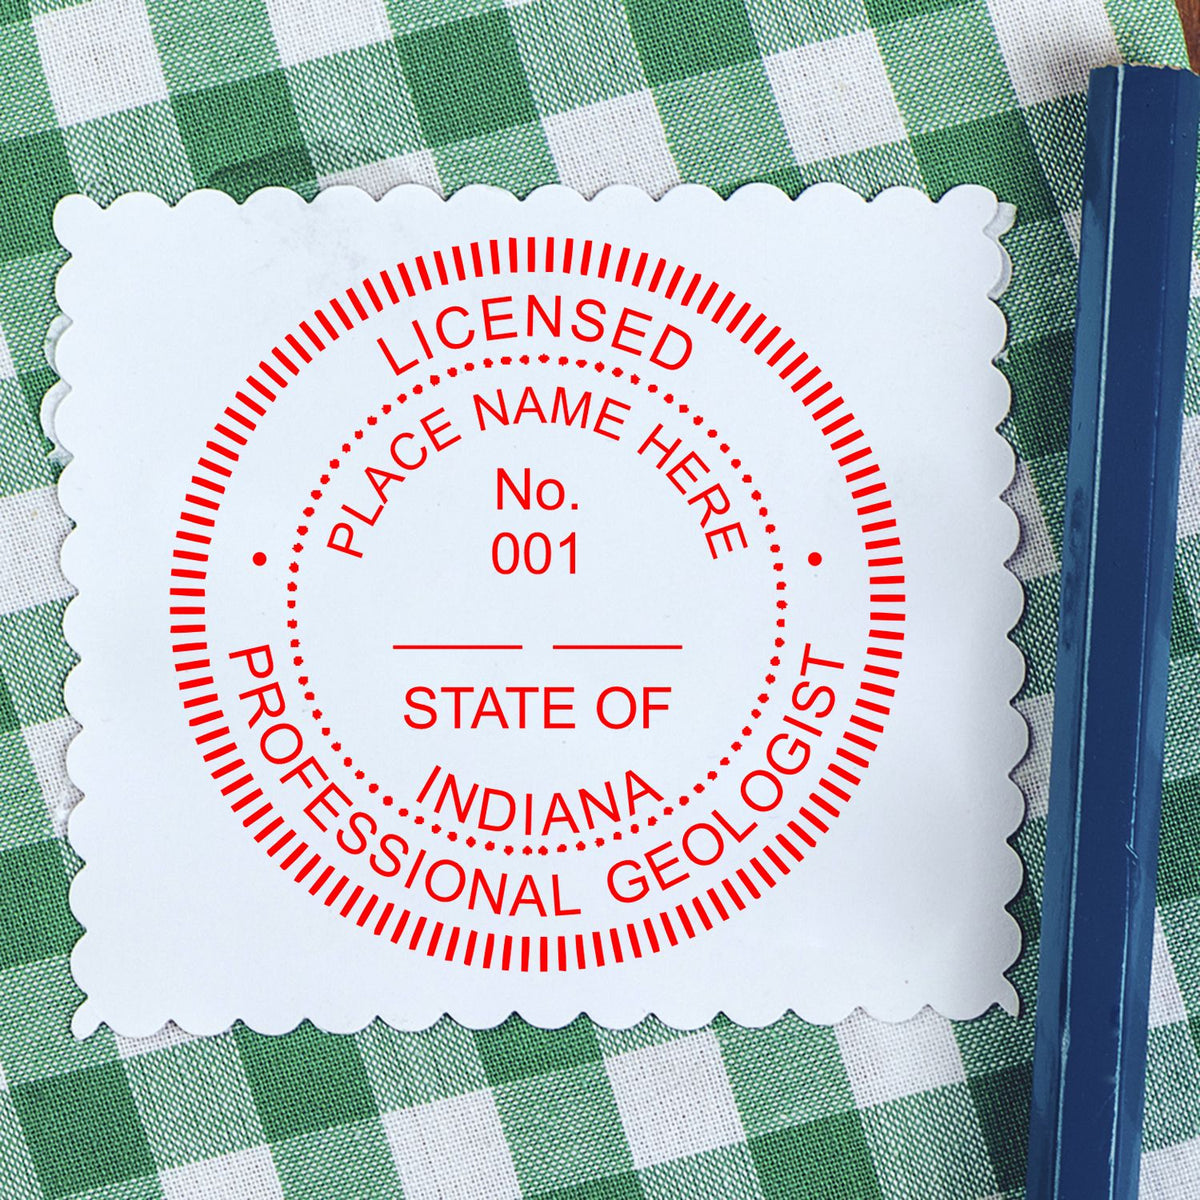 A lifestyle photo showing a stamped image of the Indiana Professional Geologist Seal Stamp on a piece of paper